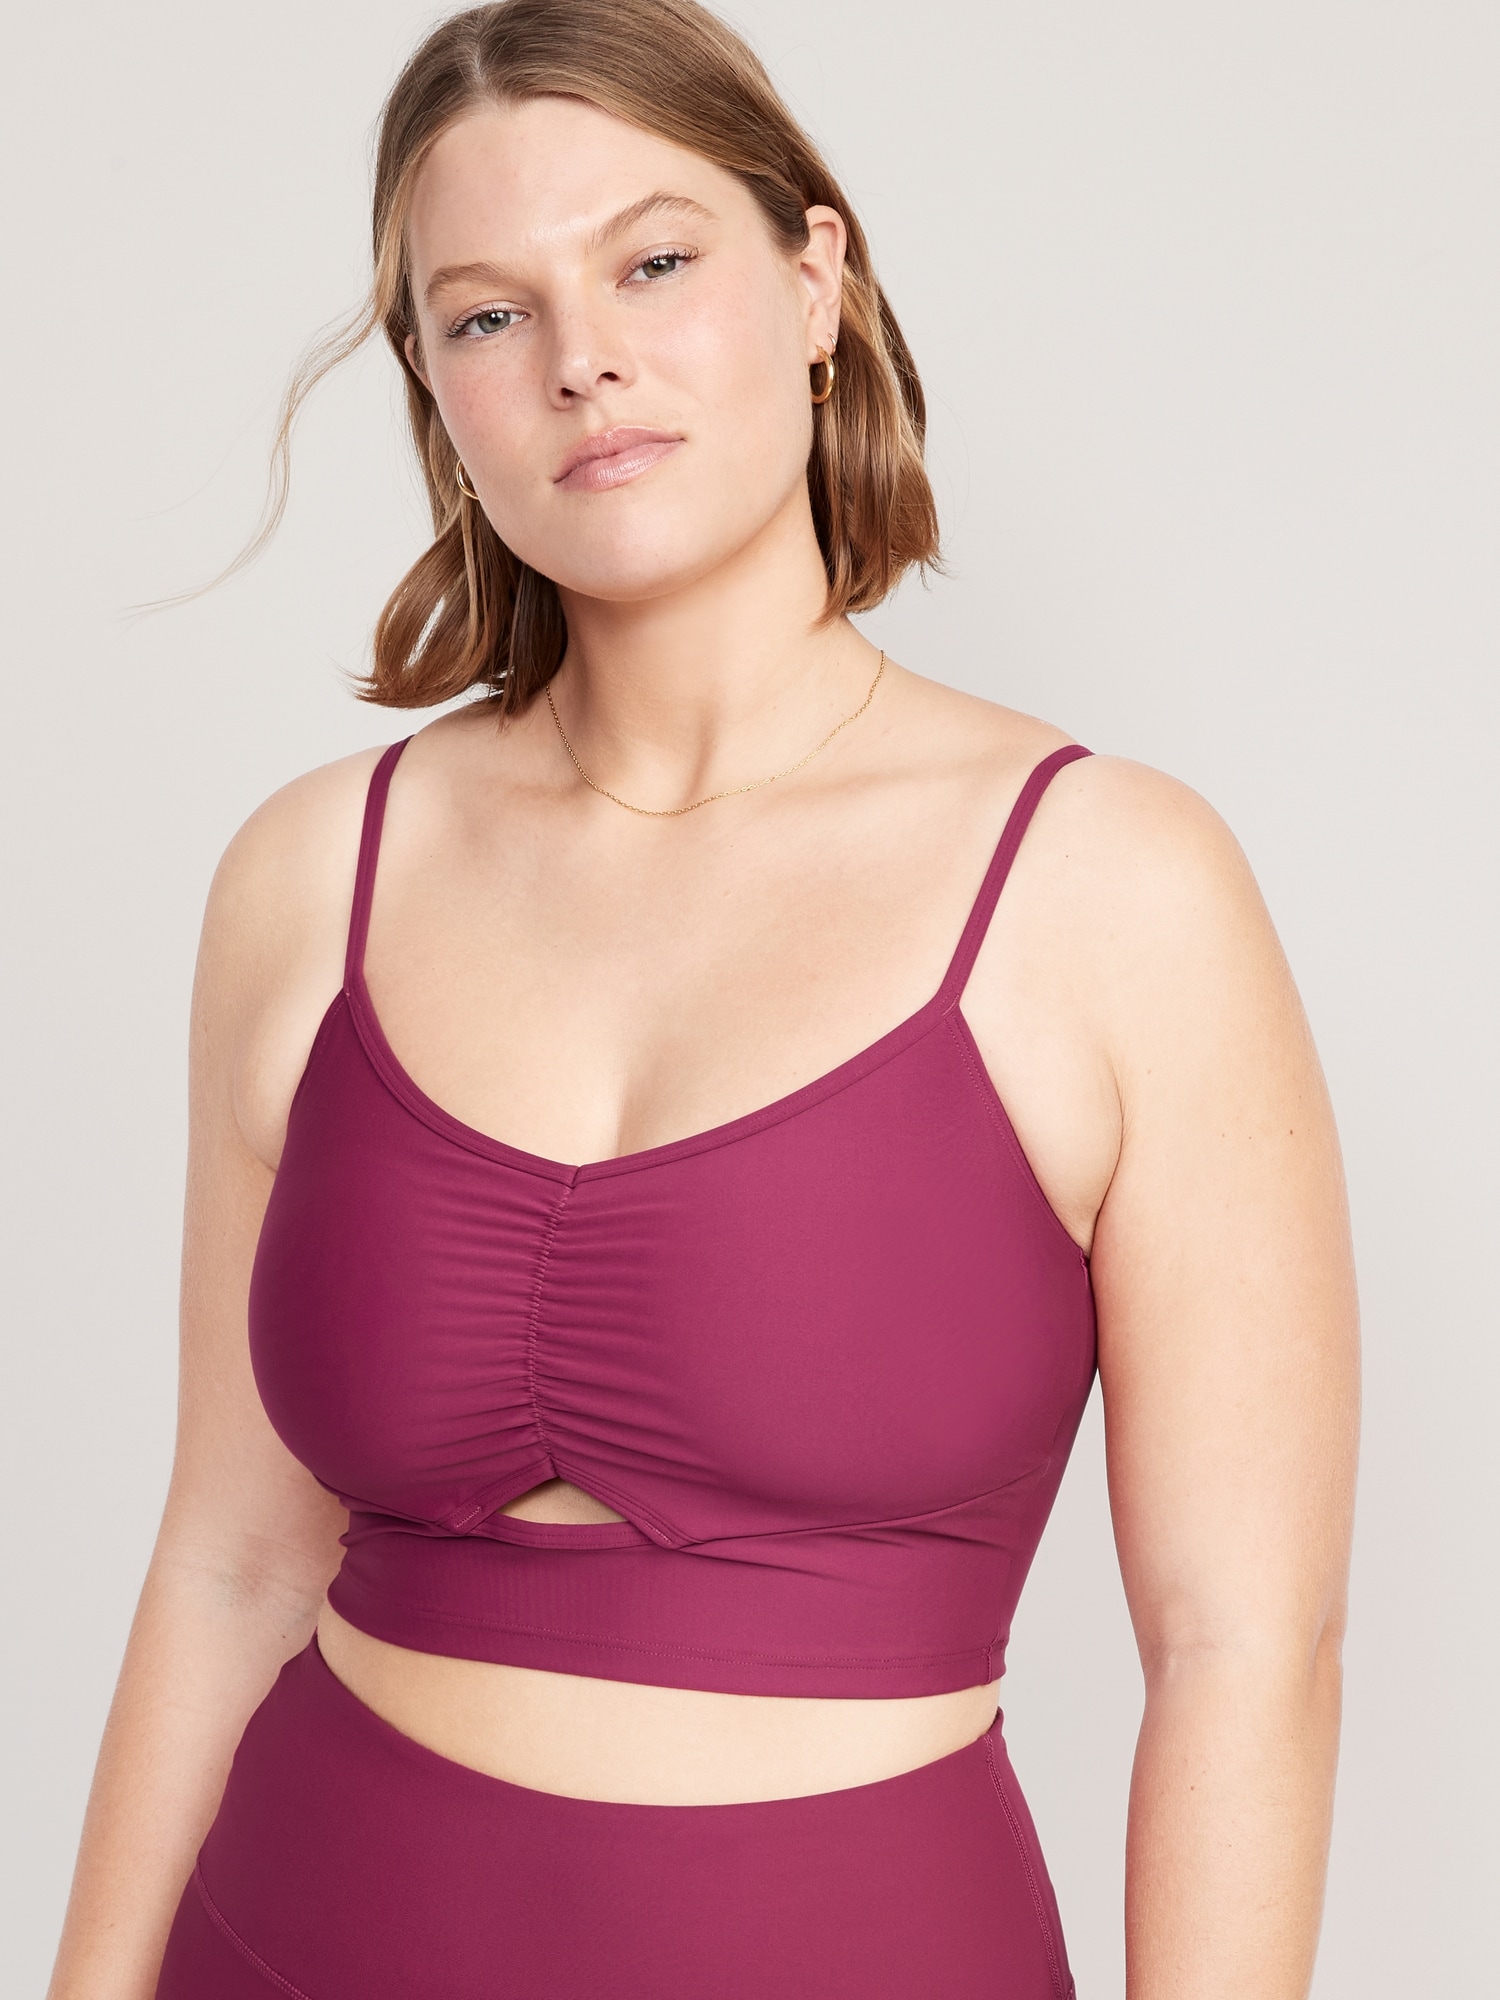 Old Navy, Intimates & Sleepwear, Old Navy Active Godry Sports Bra Light  Support Strappy Ruched Raspberry Small